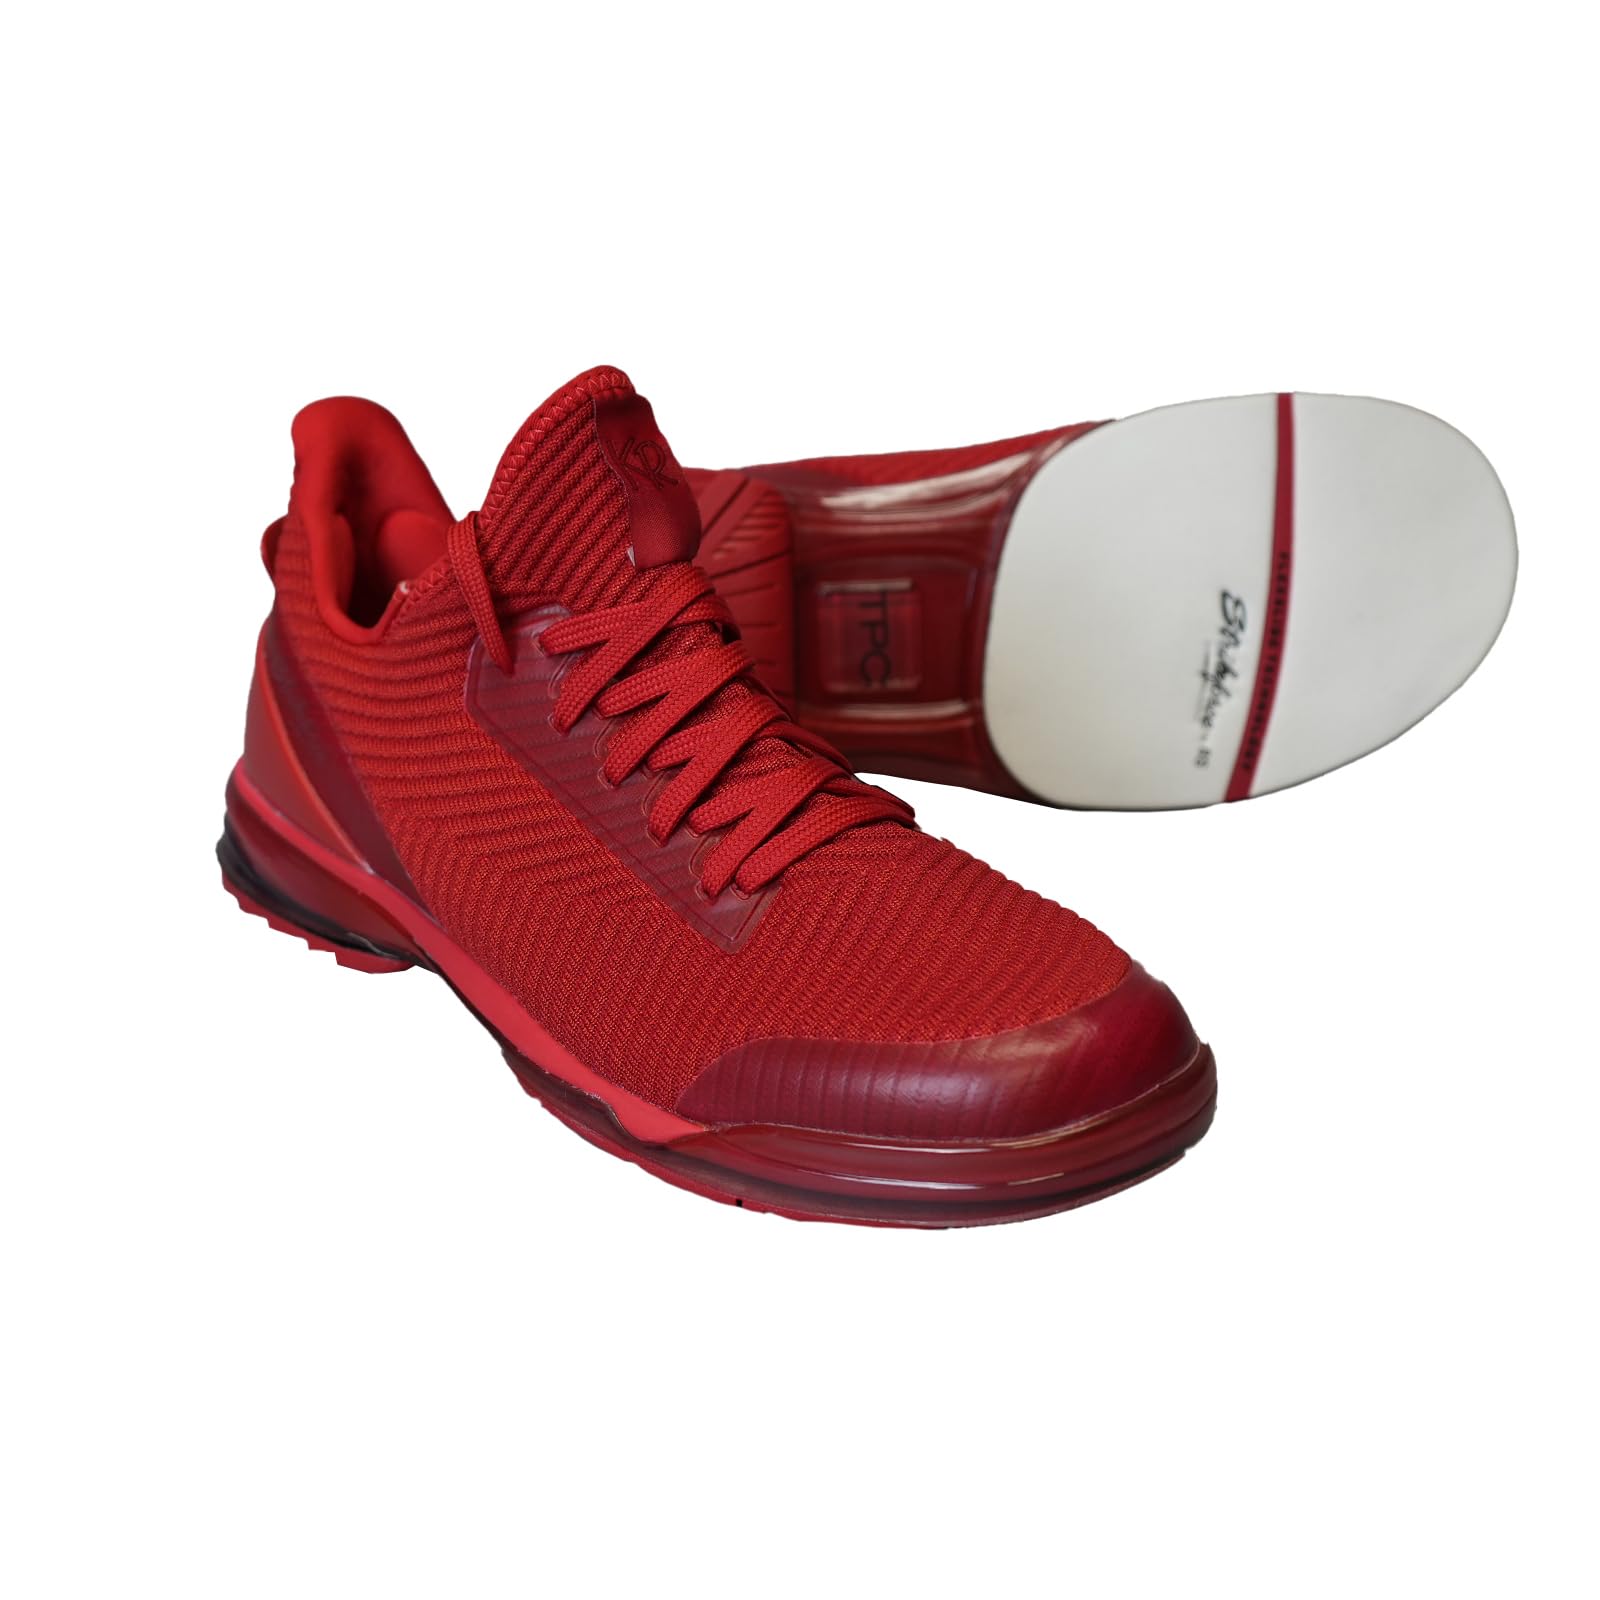 The Perfection Collection Limited Edition Alpha Red Unisex Bowling Shoe